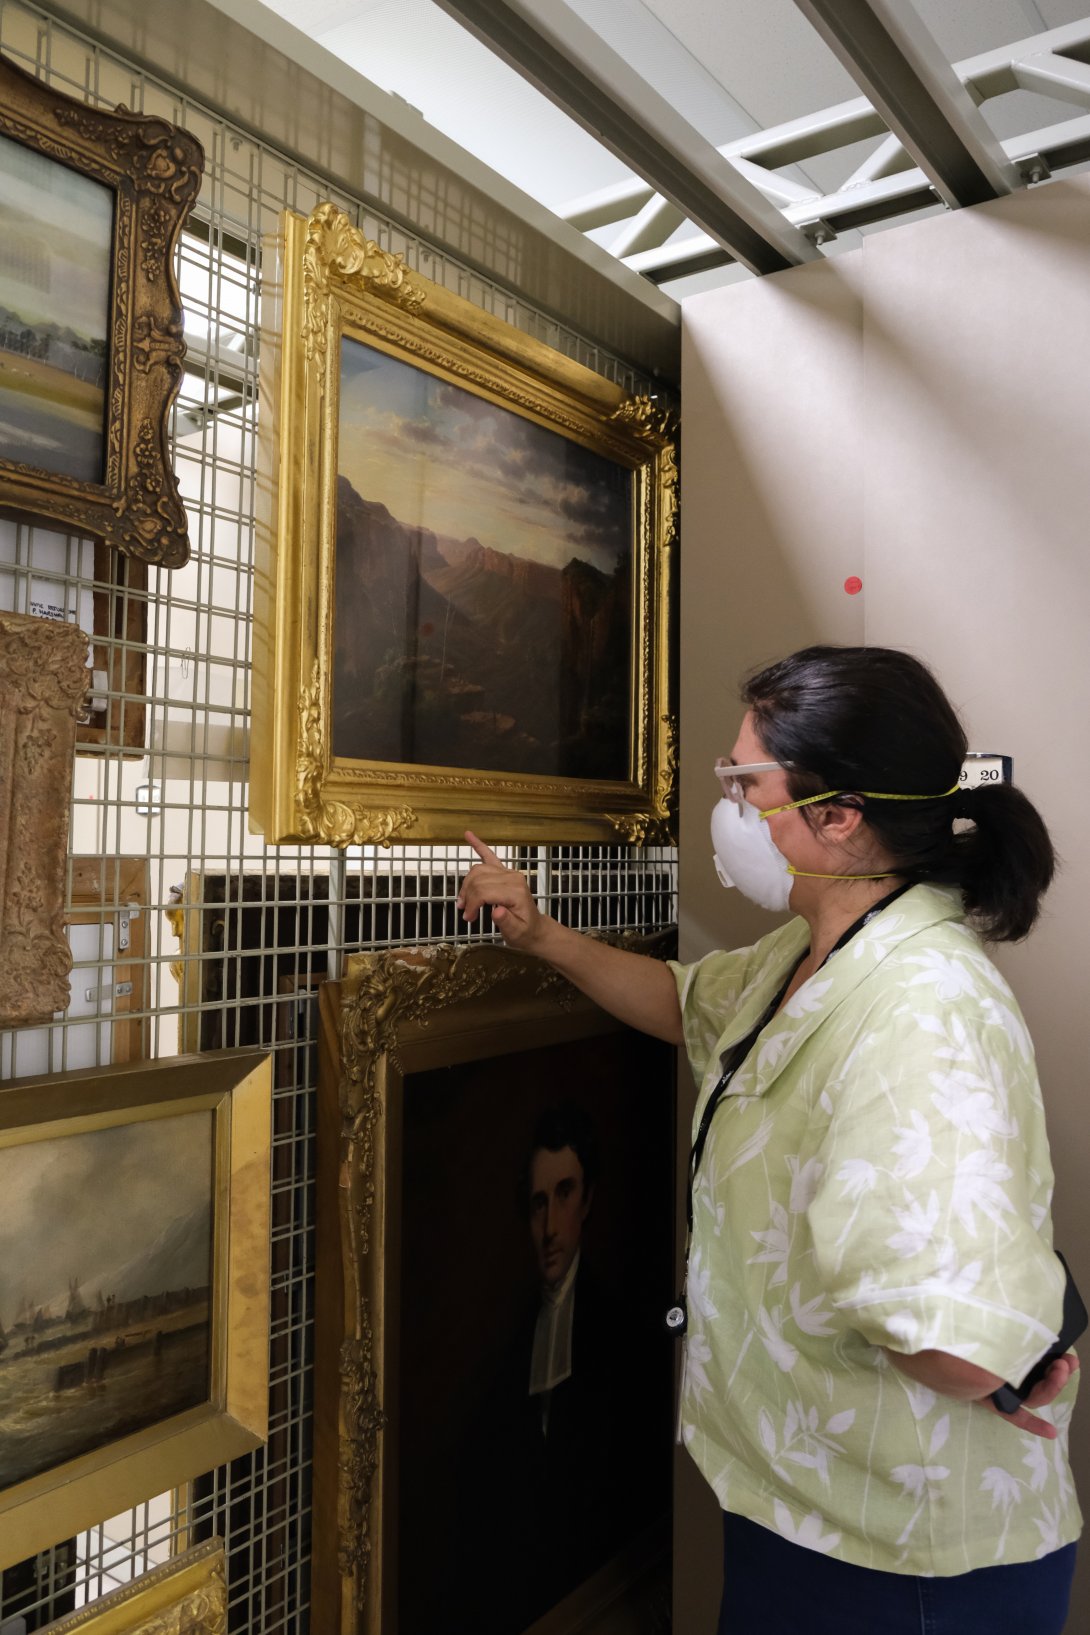 A woman in a white shirt and a face mask observes a painting in a gilded gold frame